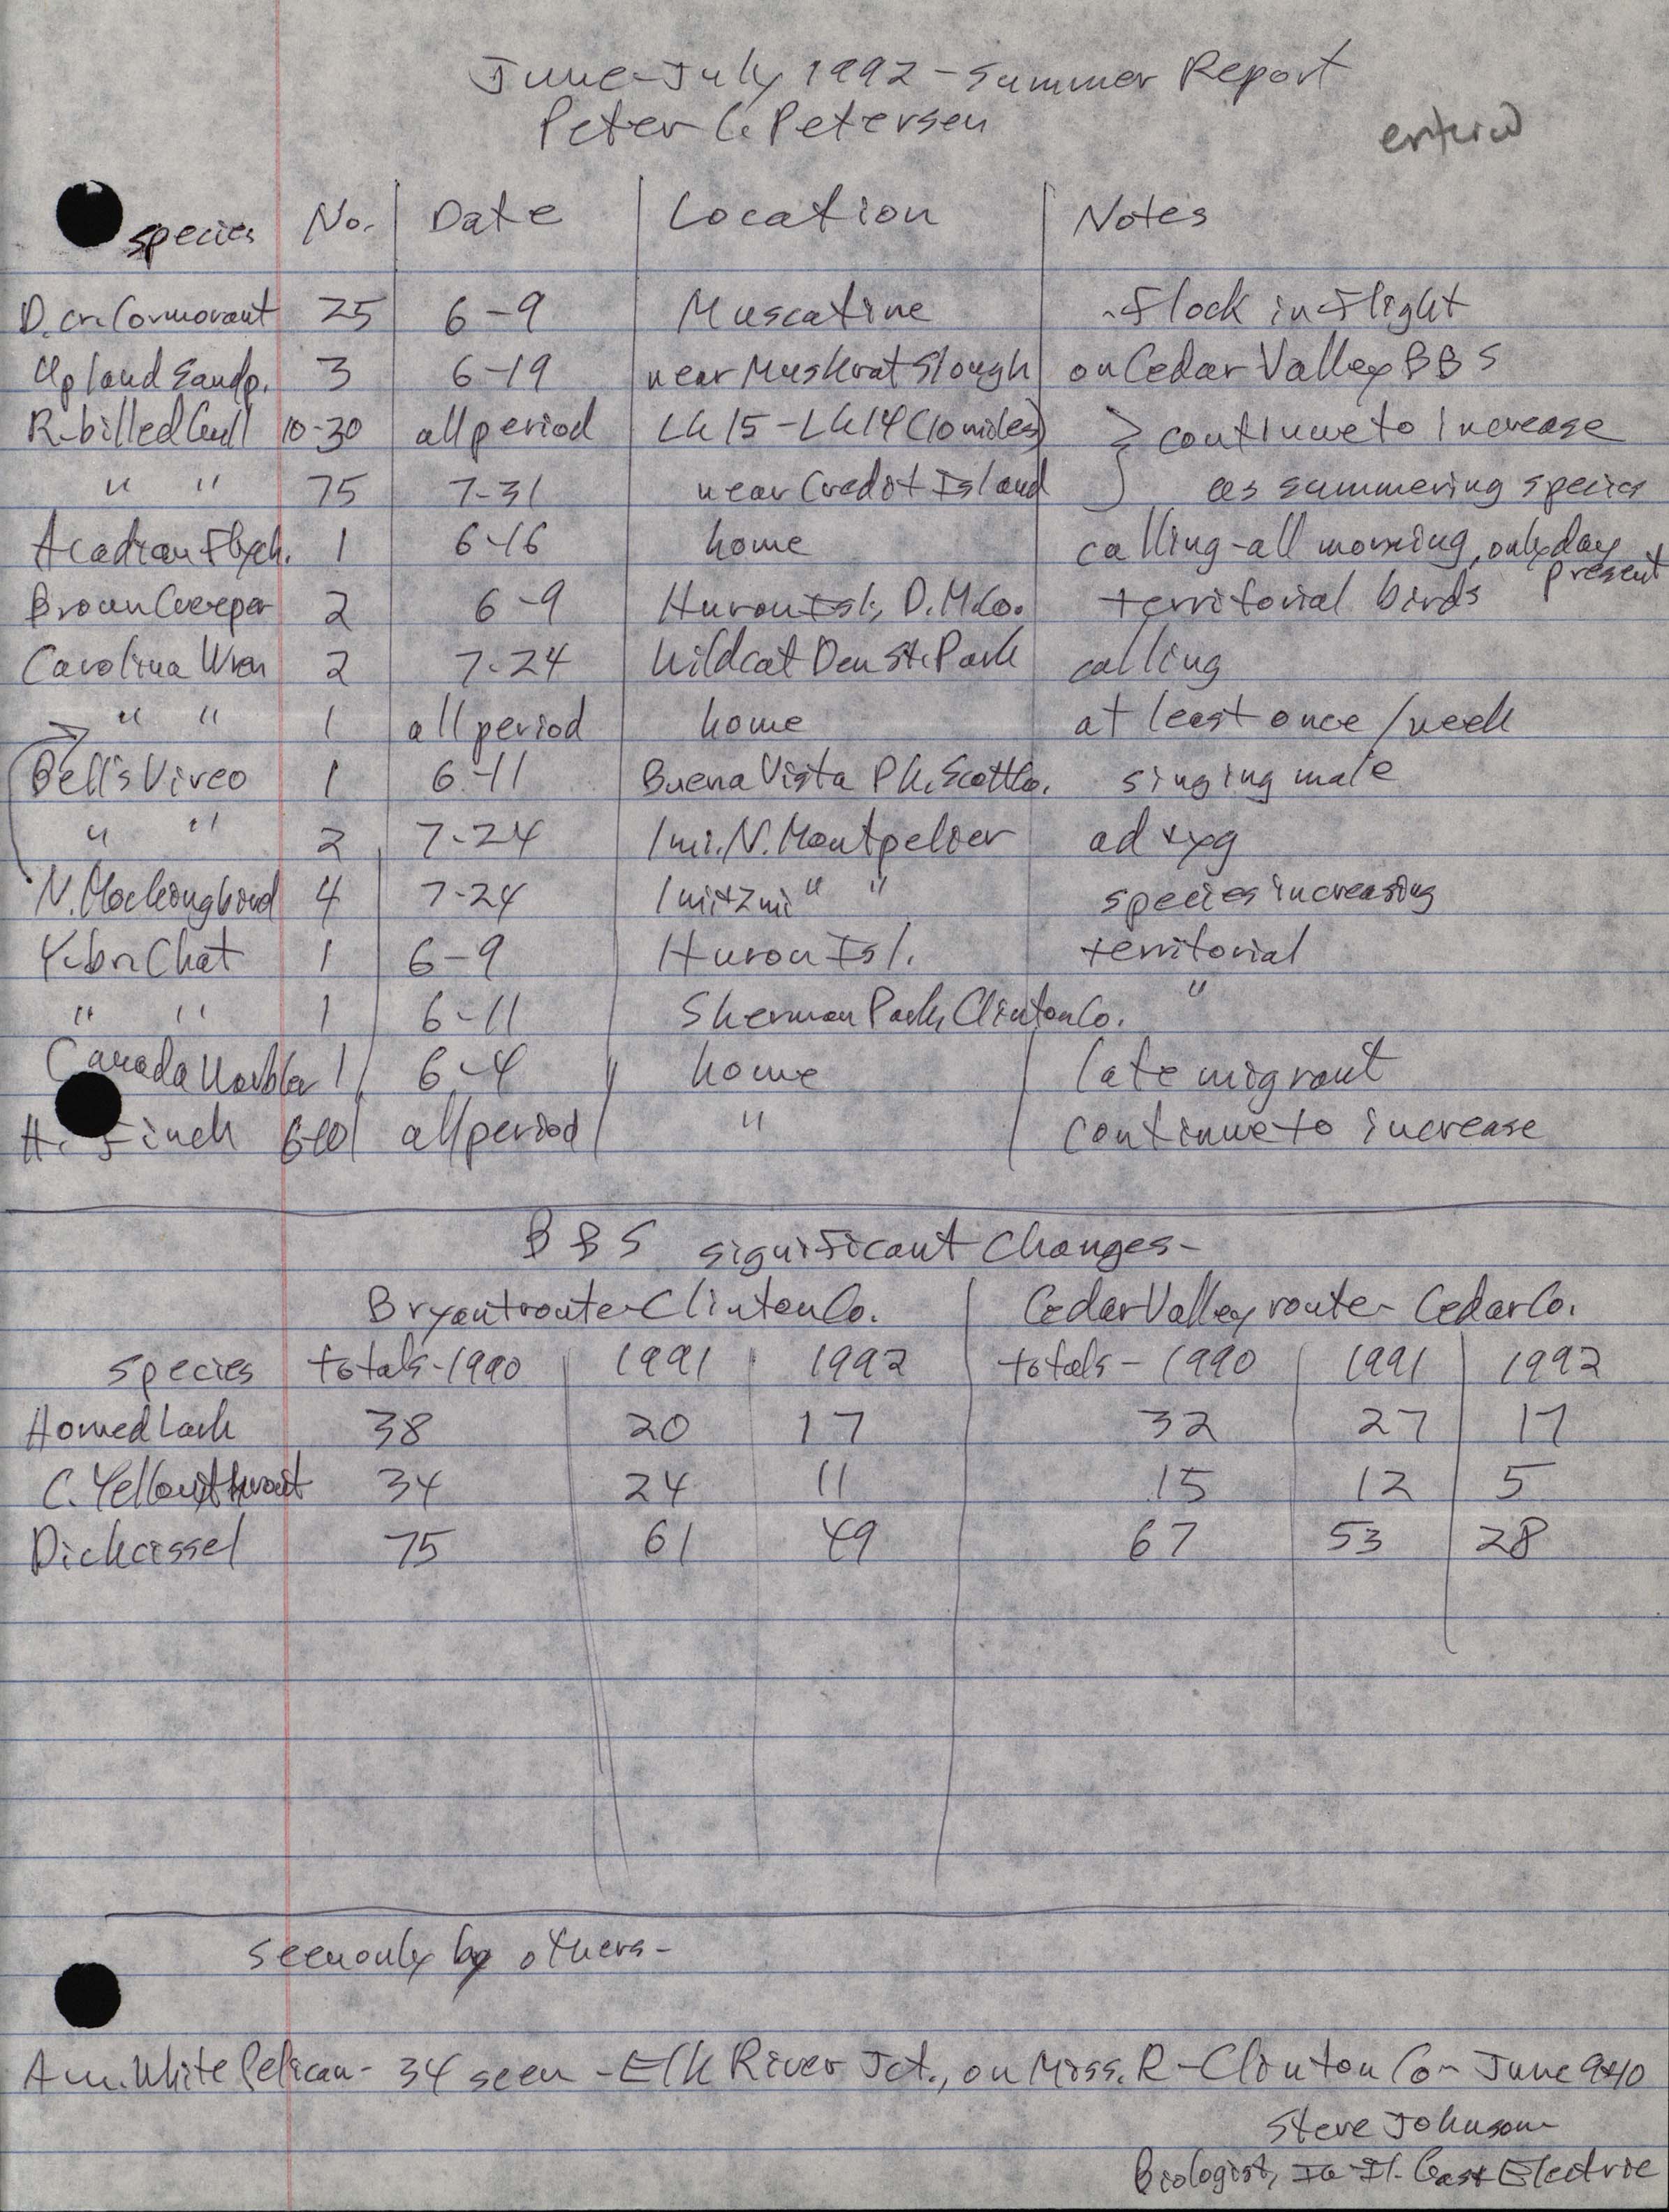 Field notes contributed by Peter C. Petersen, summer 1992